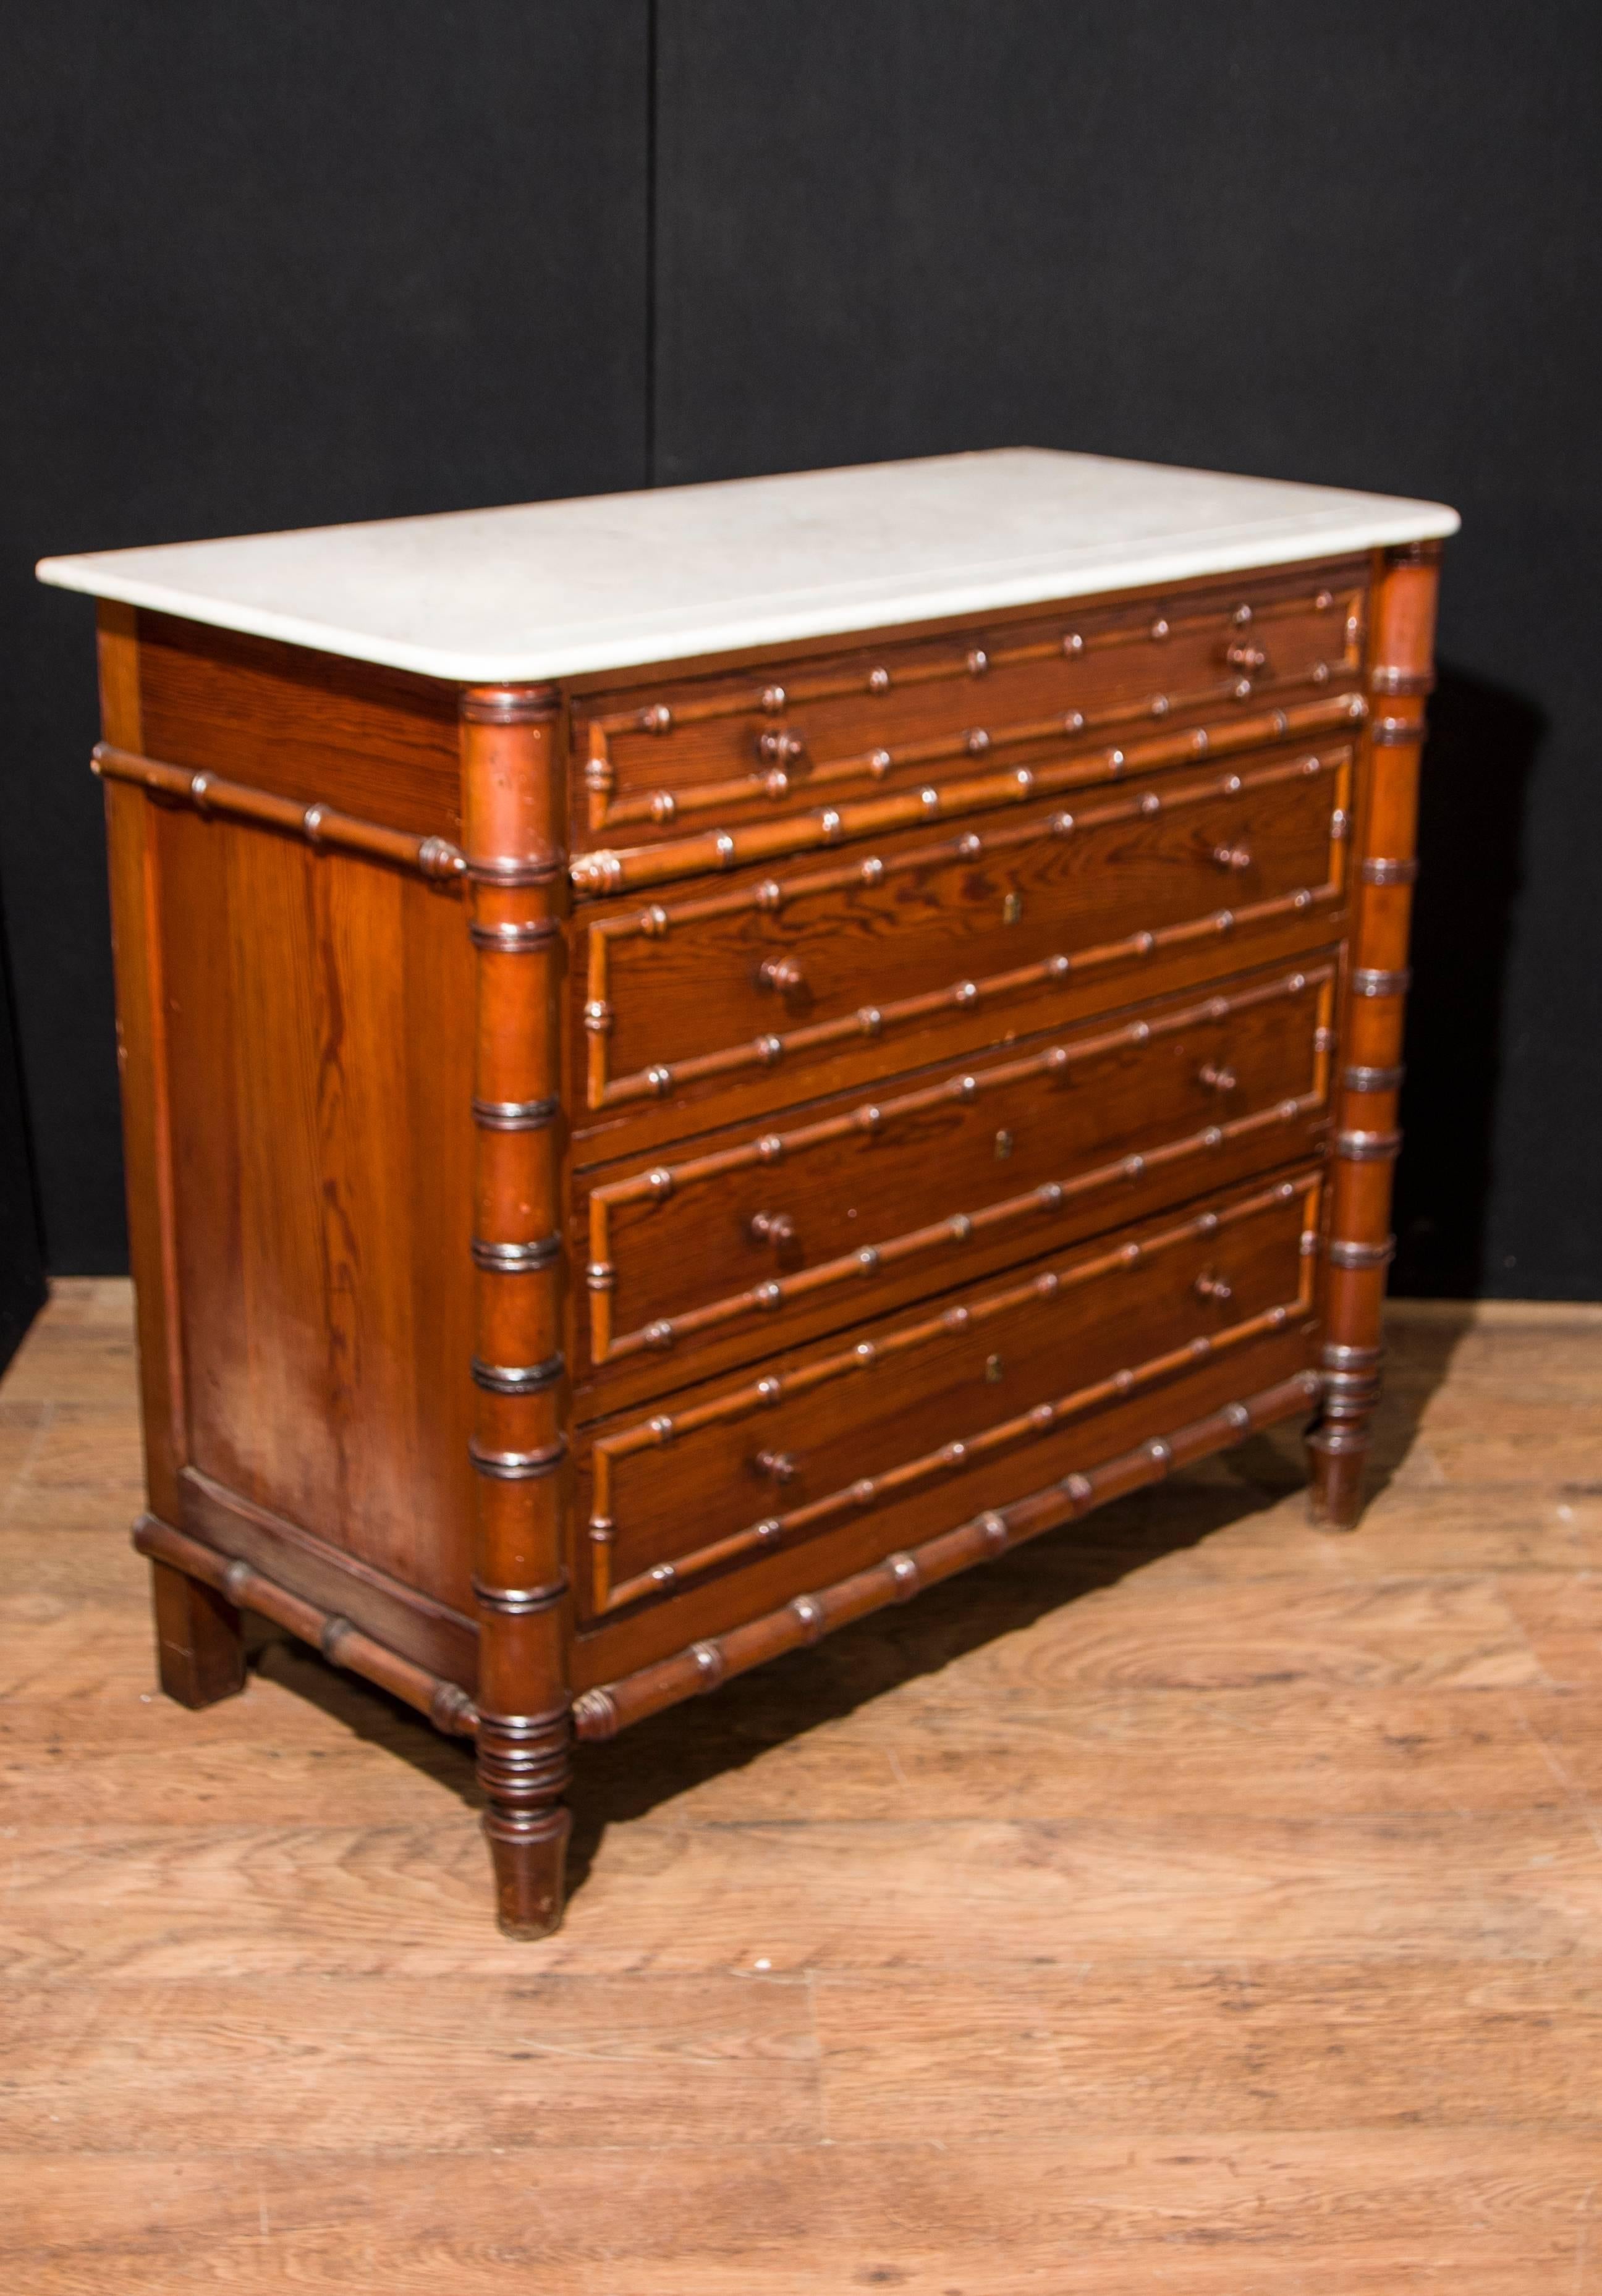 Gorgeous antique French Regency chest of drawers with faux bamboo look.
We date this wonderful commode to circa 1890.
Very trendy look with faux bamboo crafted from pine.
White marble top is smooth and chip free.
Four drawers so ample storage